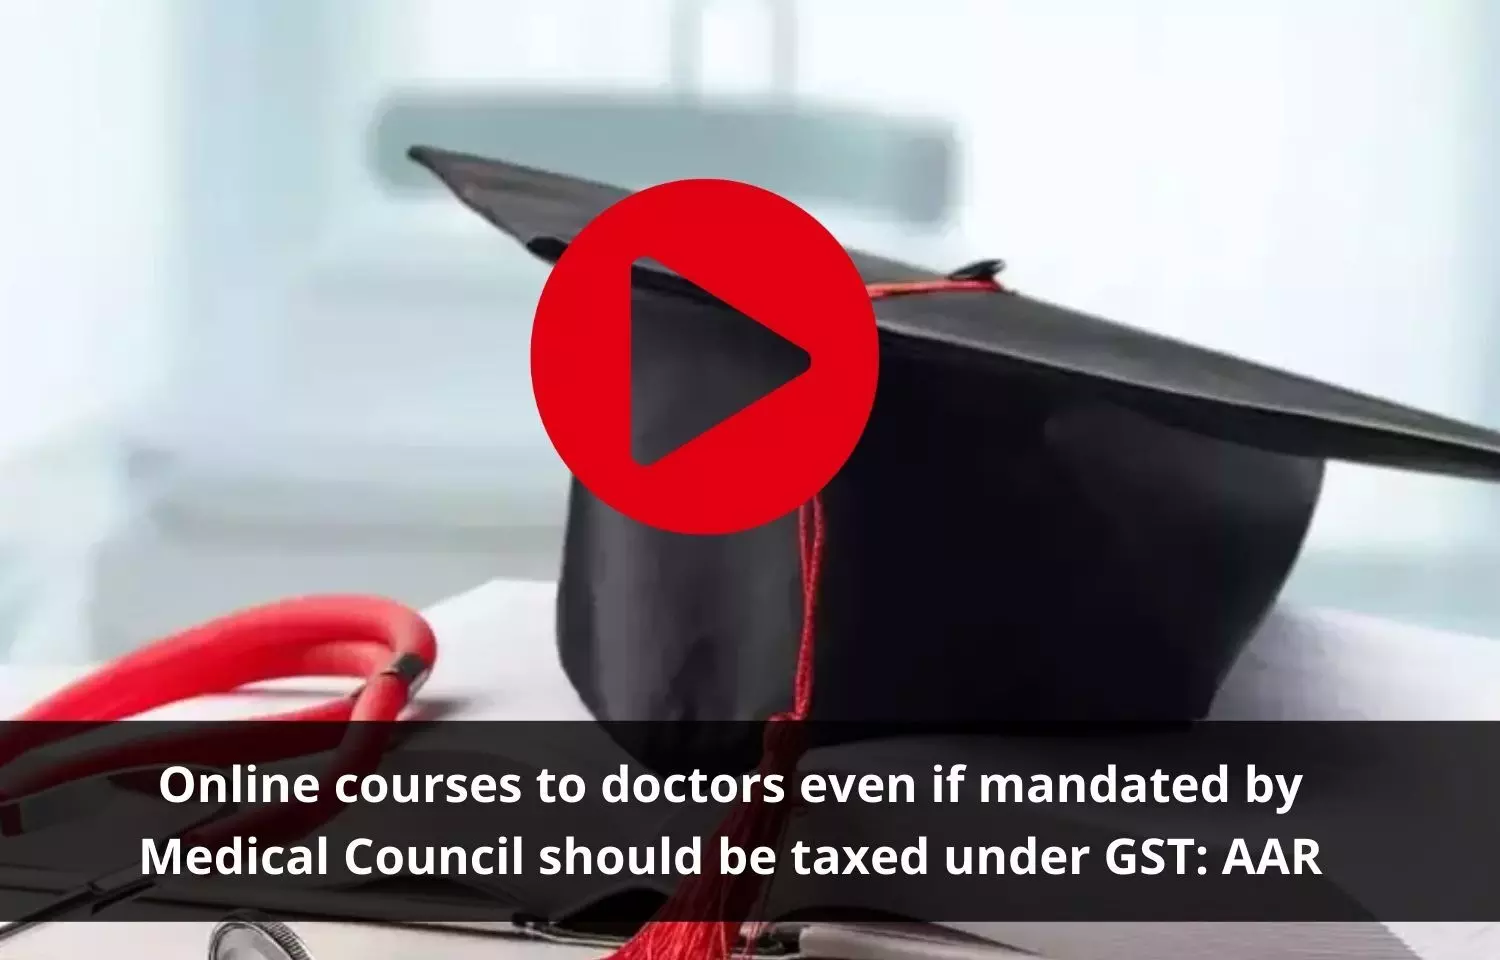 Online courses to doctors even if mandated by Medical Council should be taxed under GST: AAR